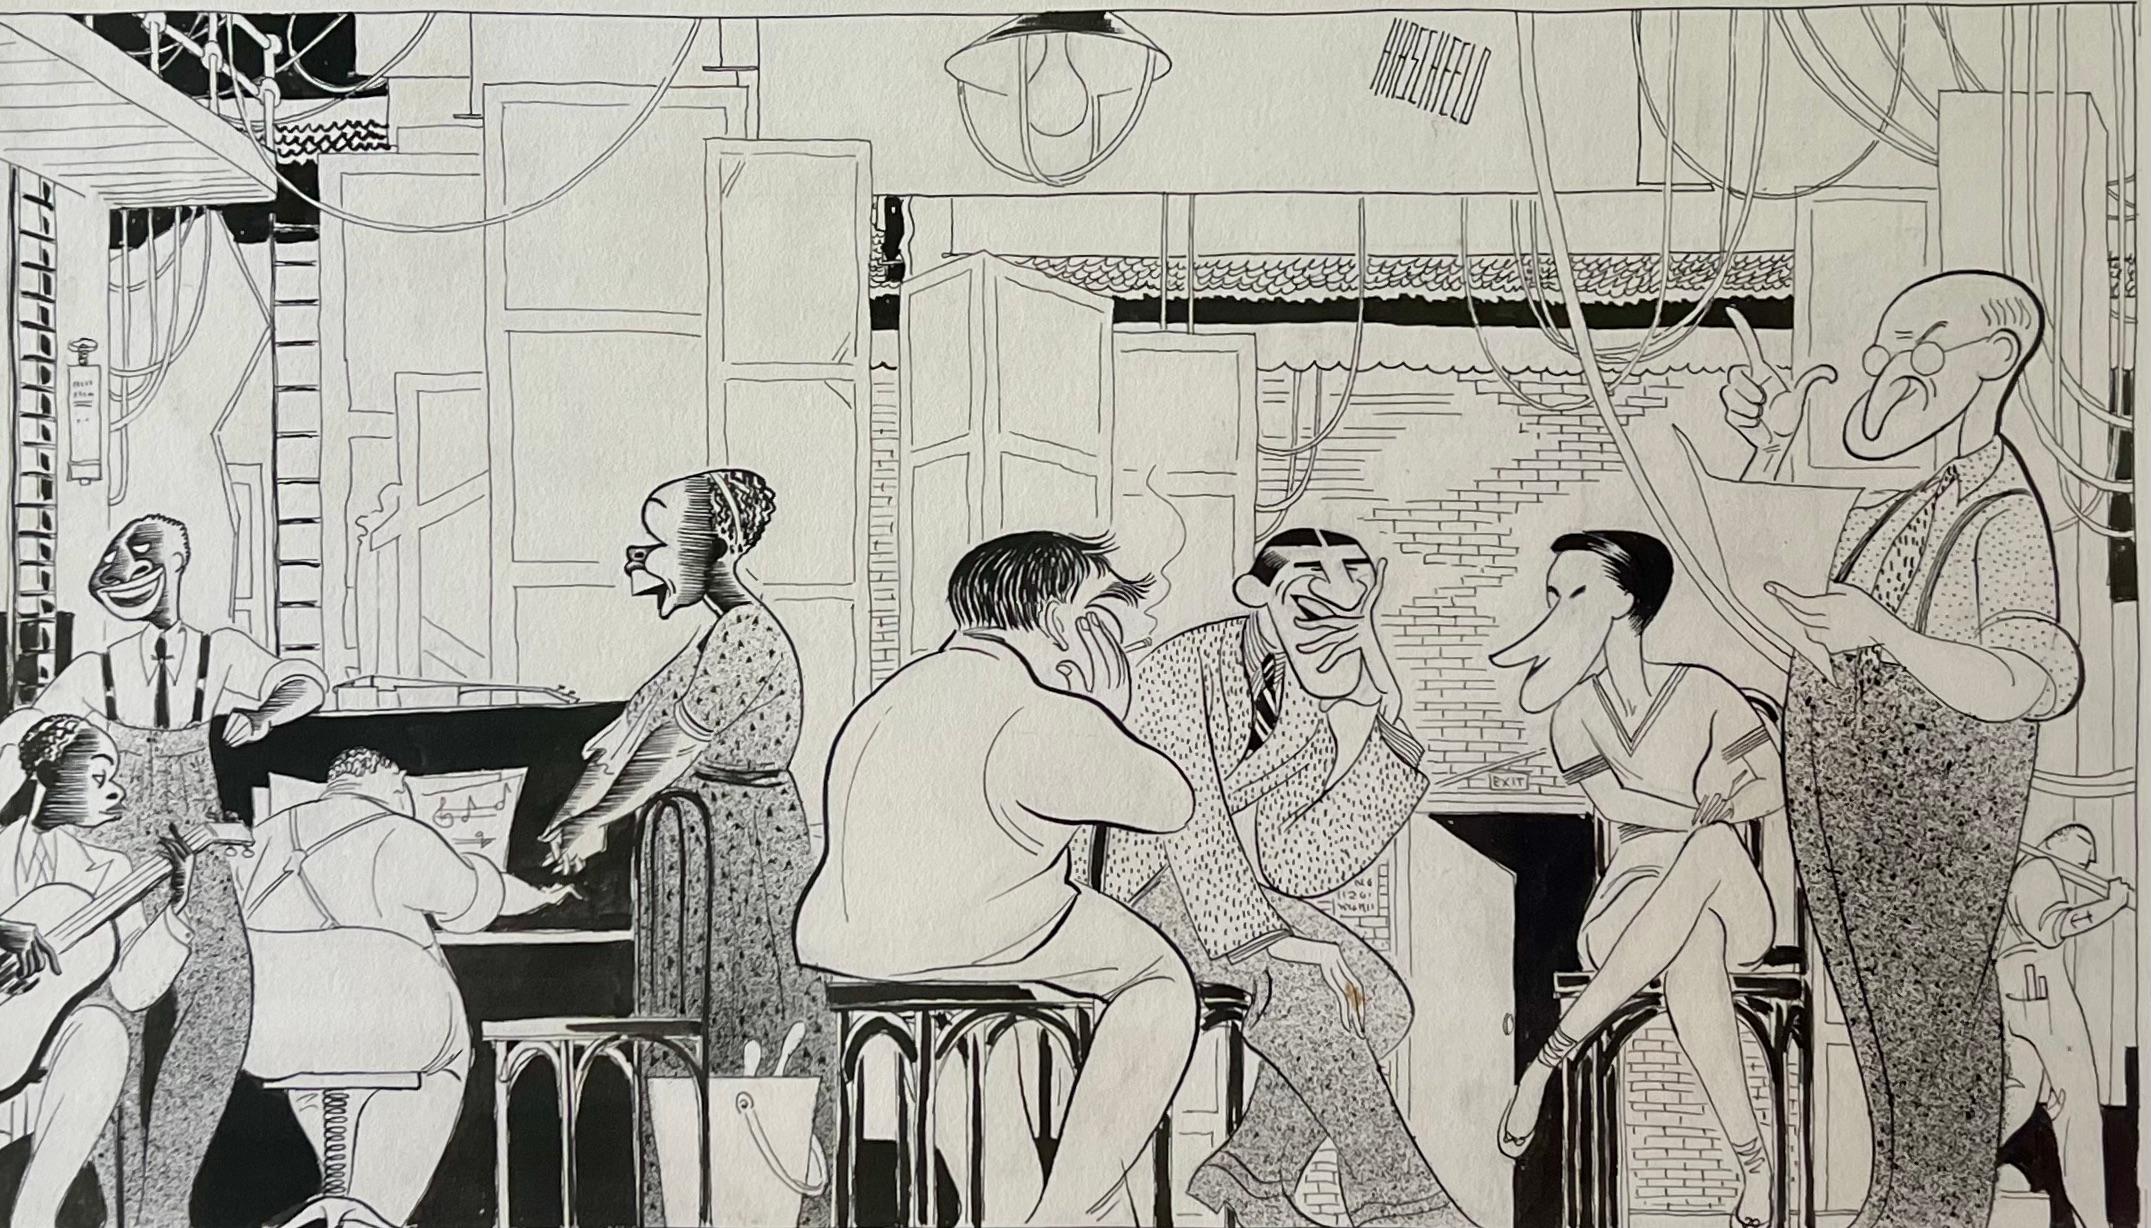 Albert Al Hirschfeld Interior Art - "At Home Abroad" 1935 Broadway Play NY Times Published Illustration 20th Century